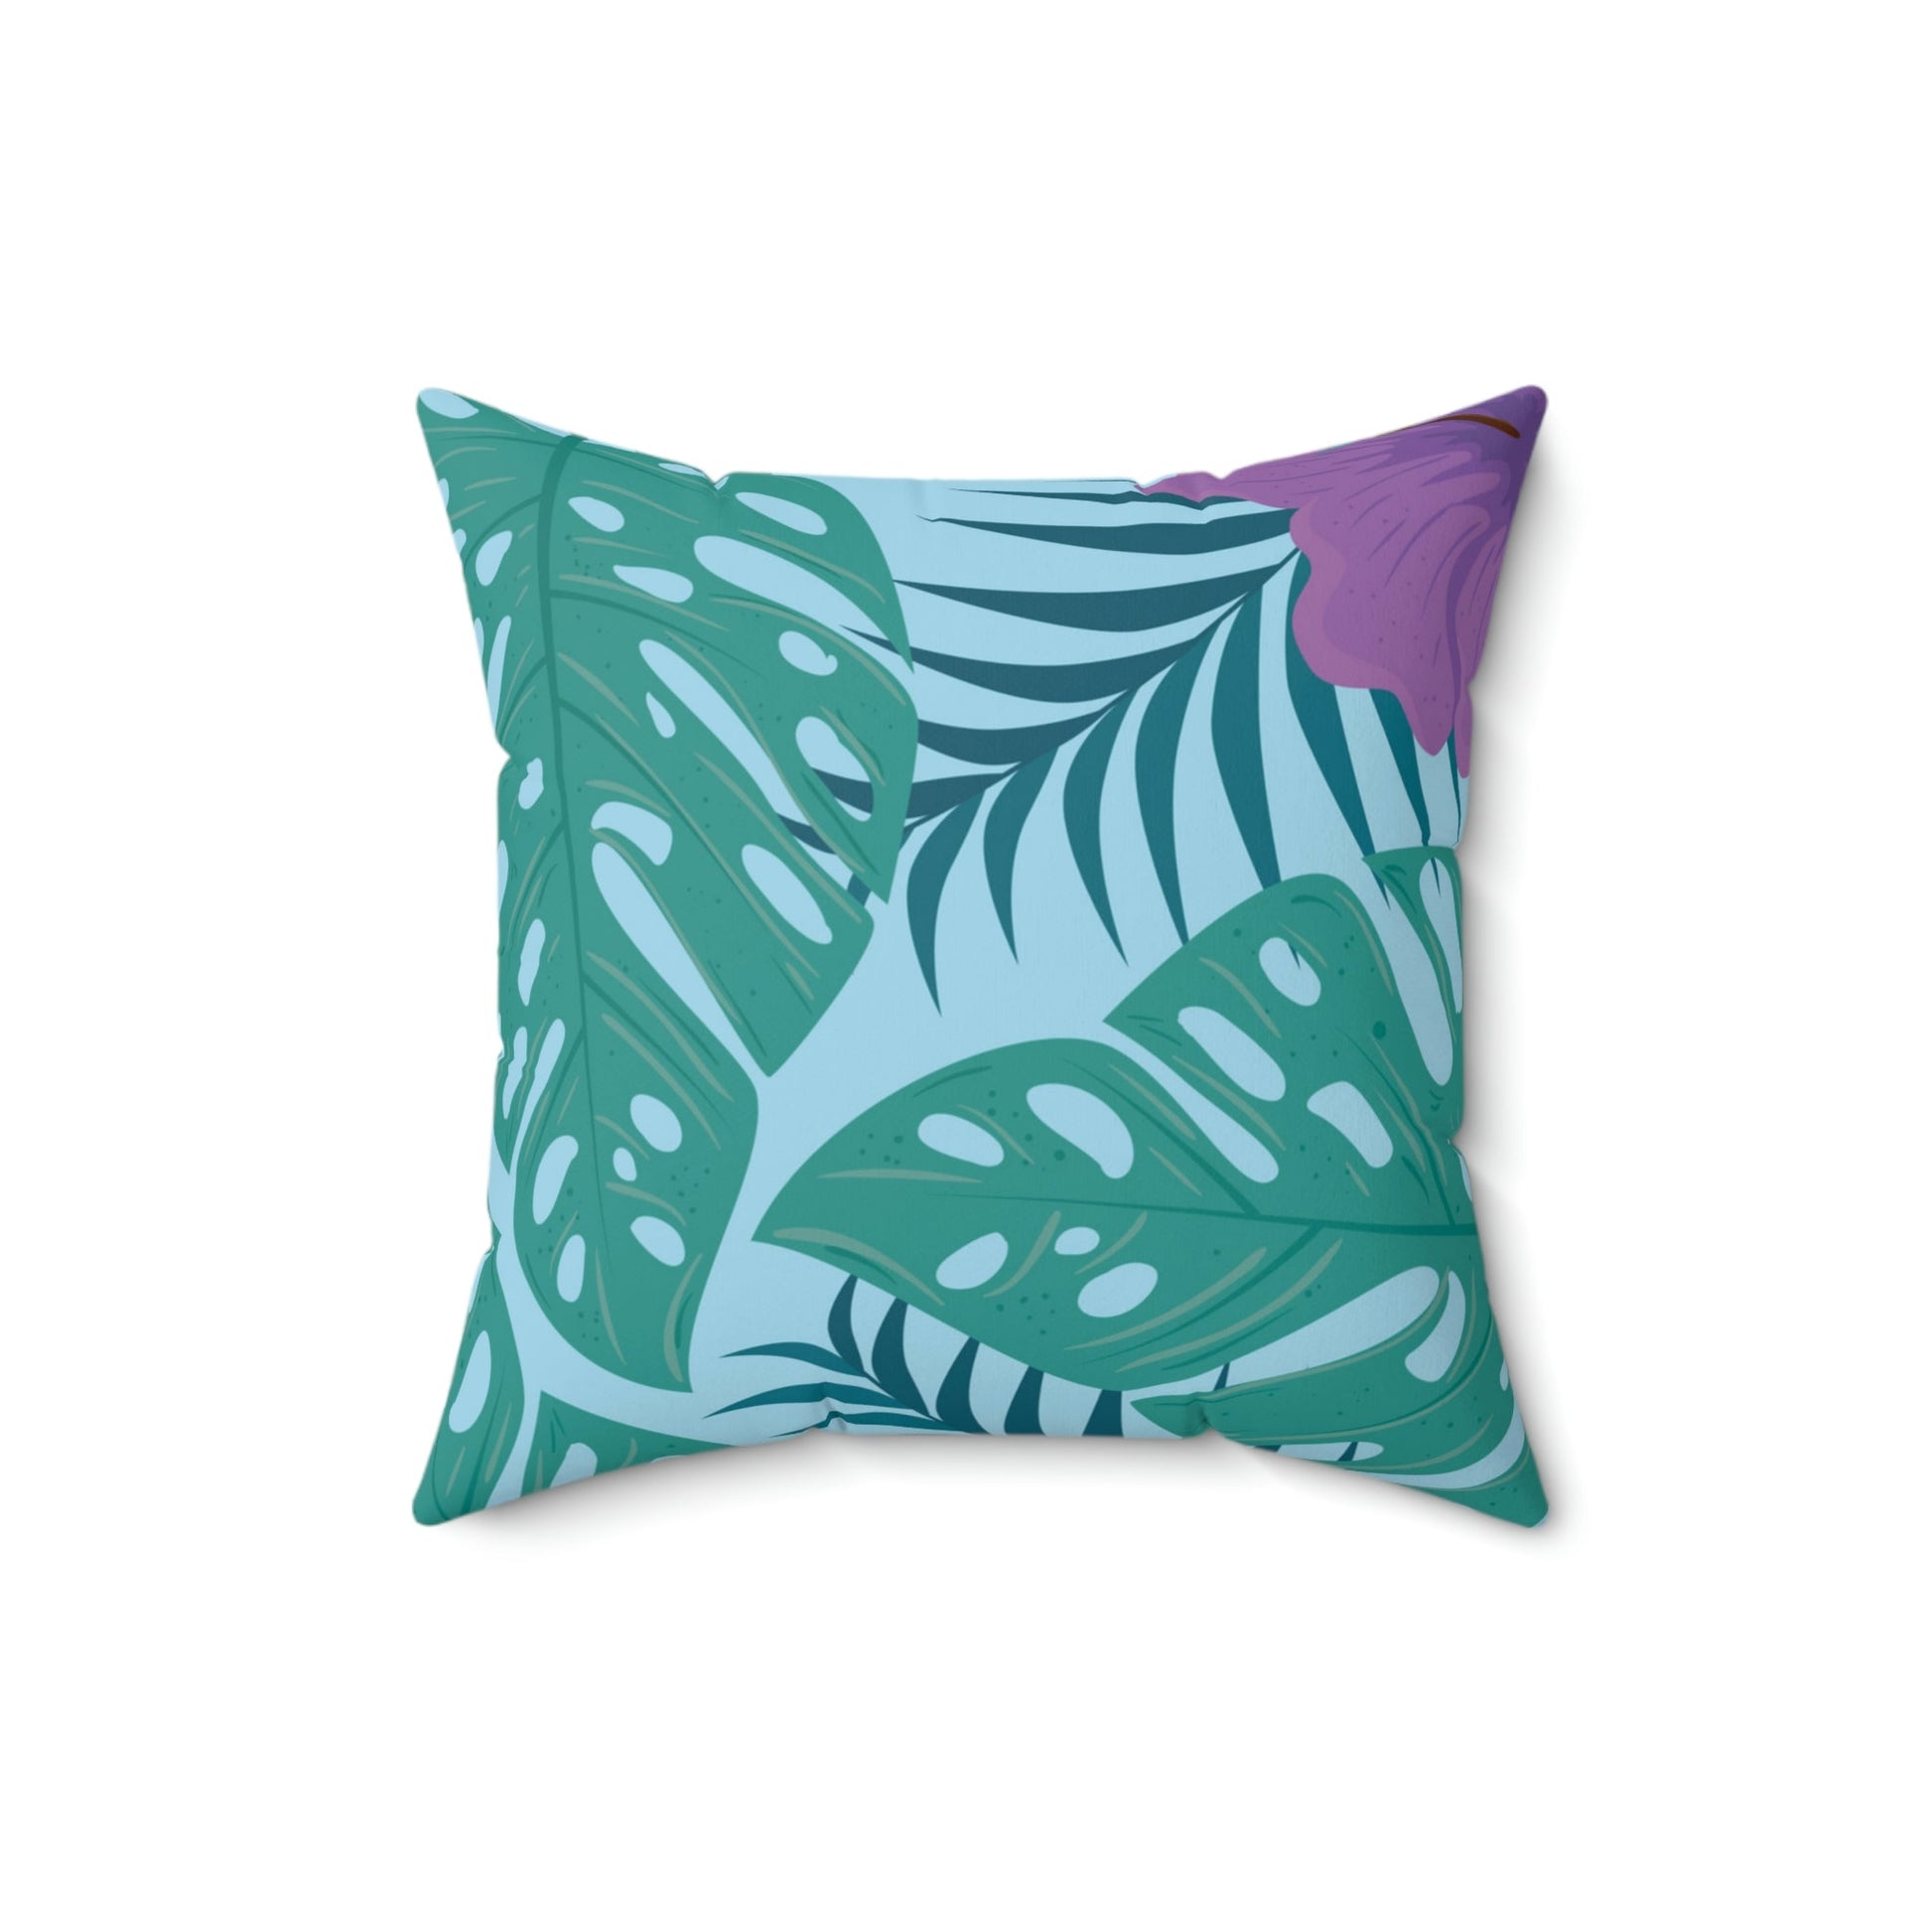 Tropical Vacay Square Pillow Home Decor Pink Sweetheart